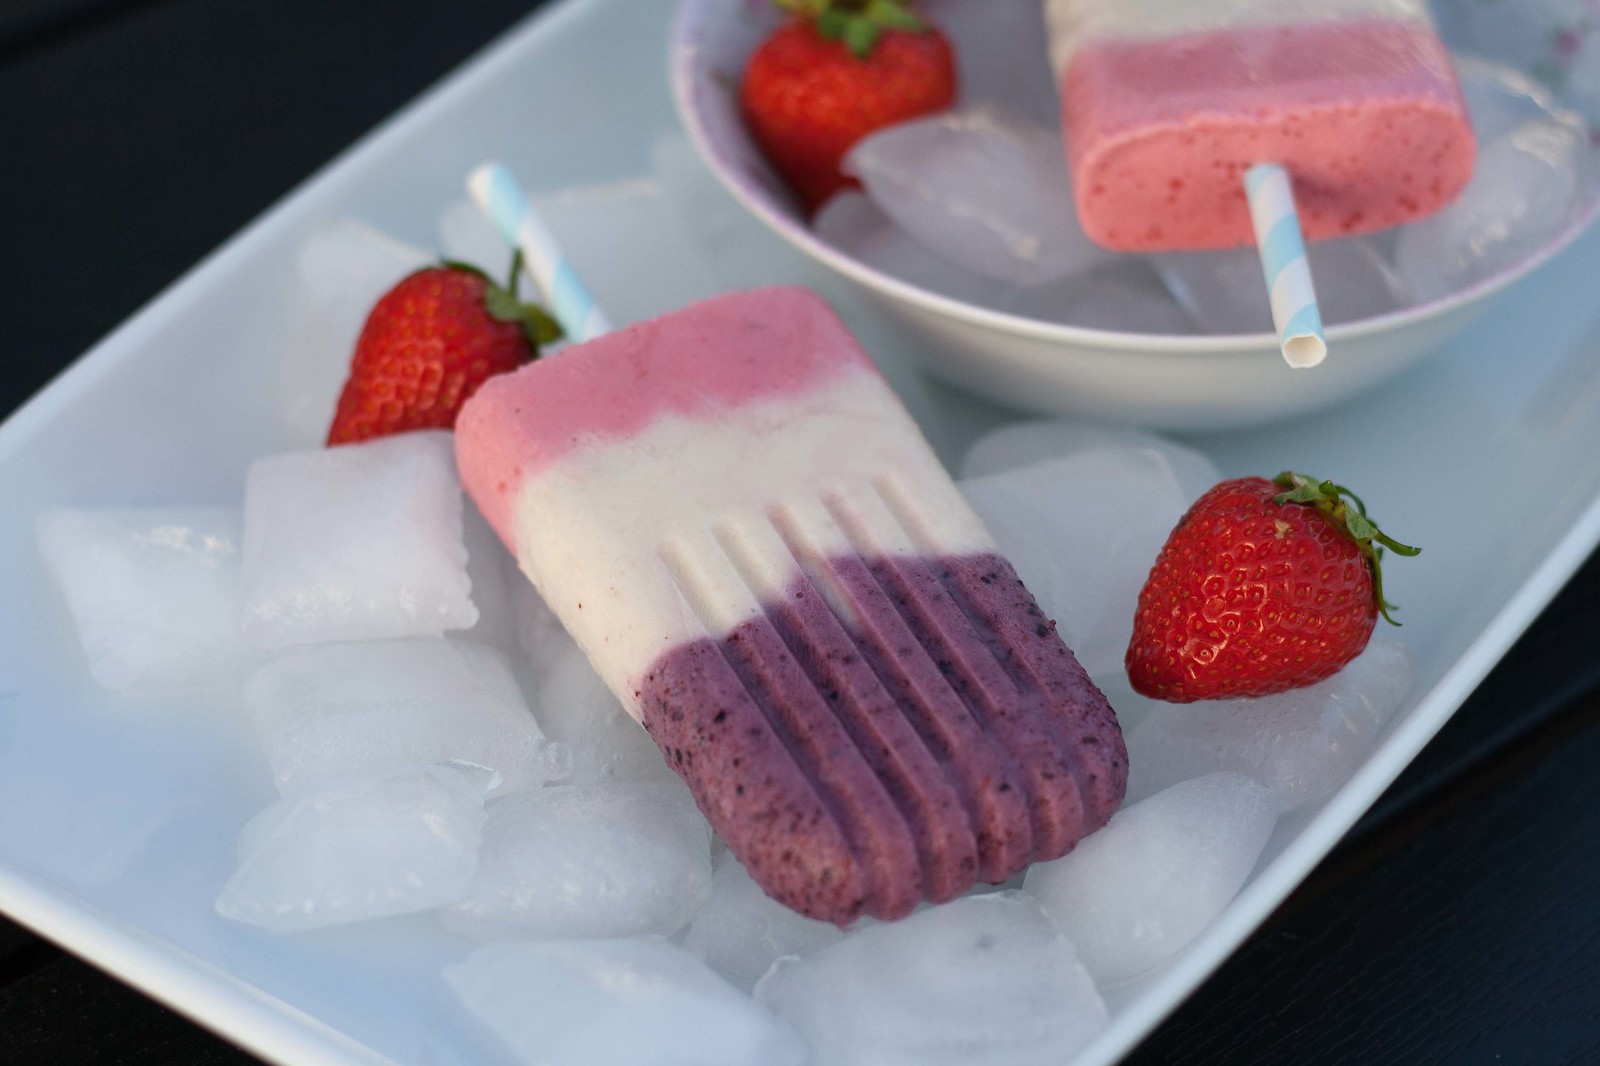 Recipe for Homemade Popsicle with Greek Yogurt and Berries